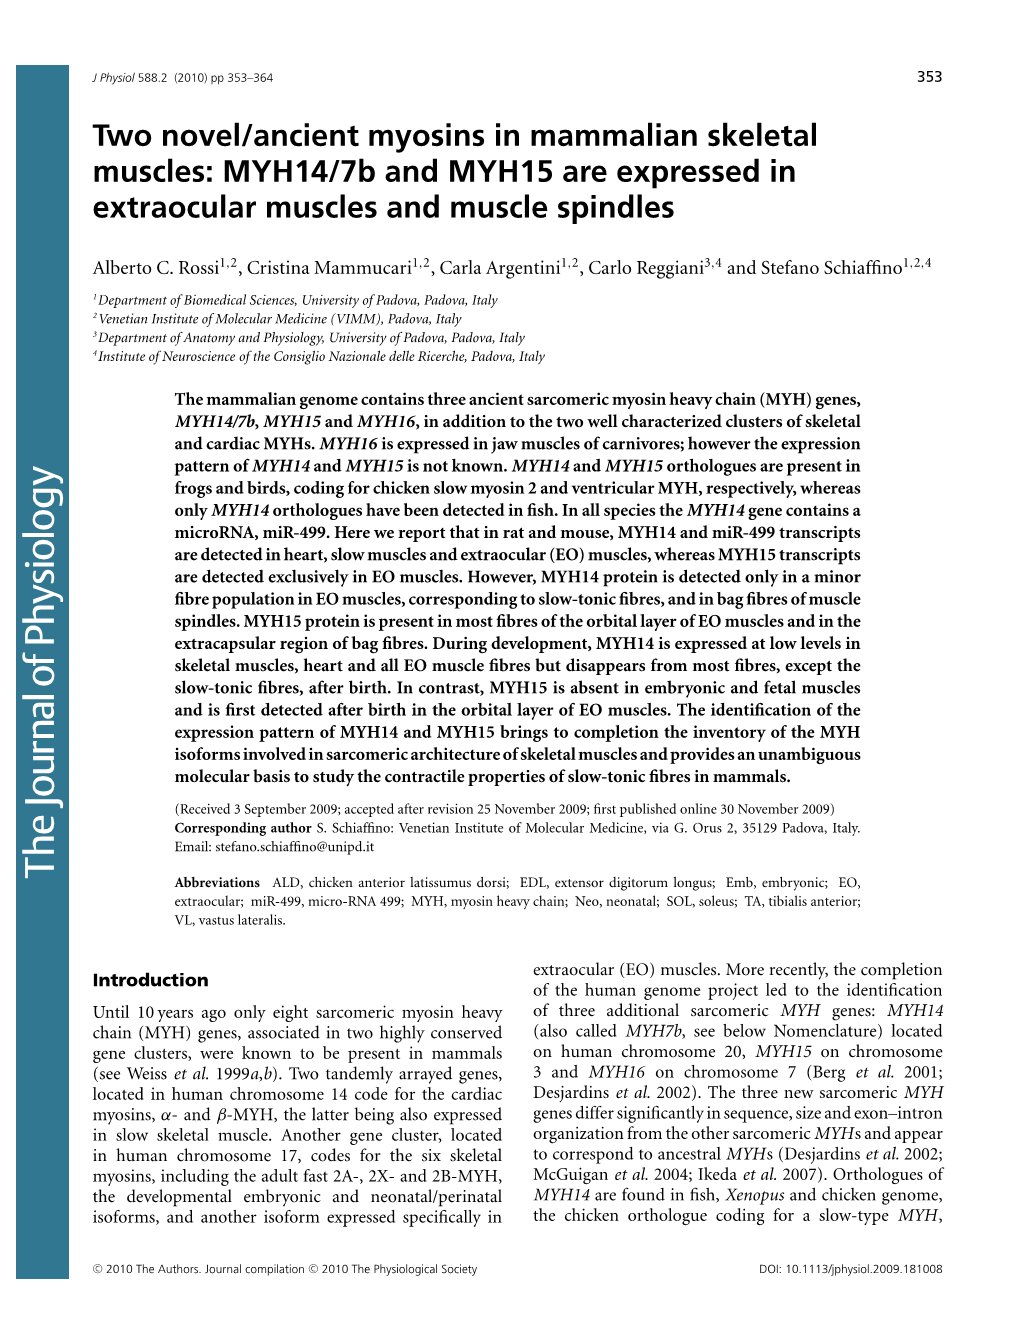 Two Novel/Ancient Myosins in Mammalian Skeletal Muscles: MYH14/7B and MYH15 Are Expressed in Extraocular Muscles and Muscle Spindles